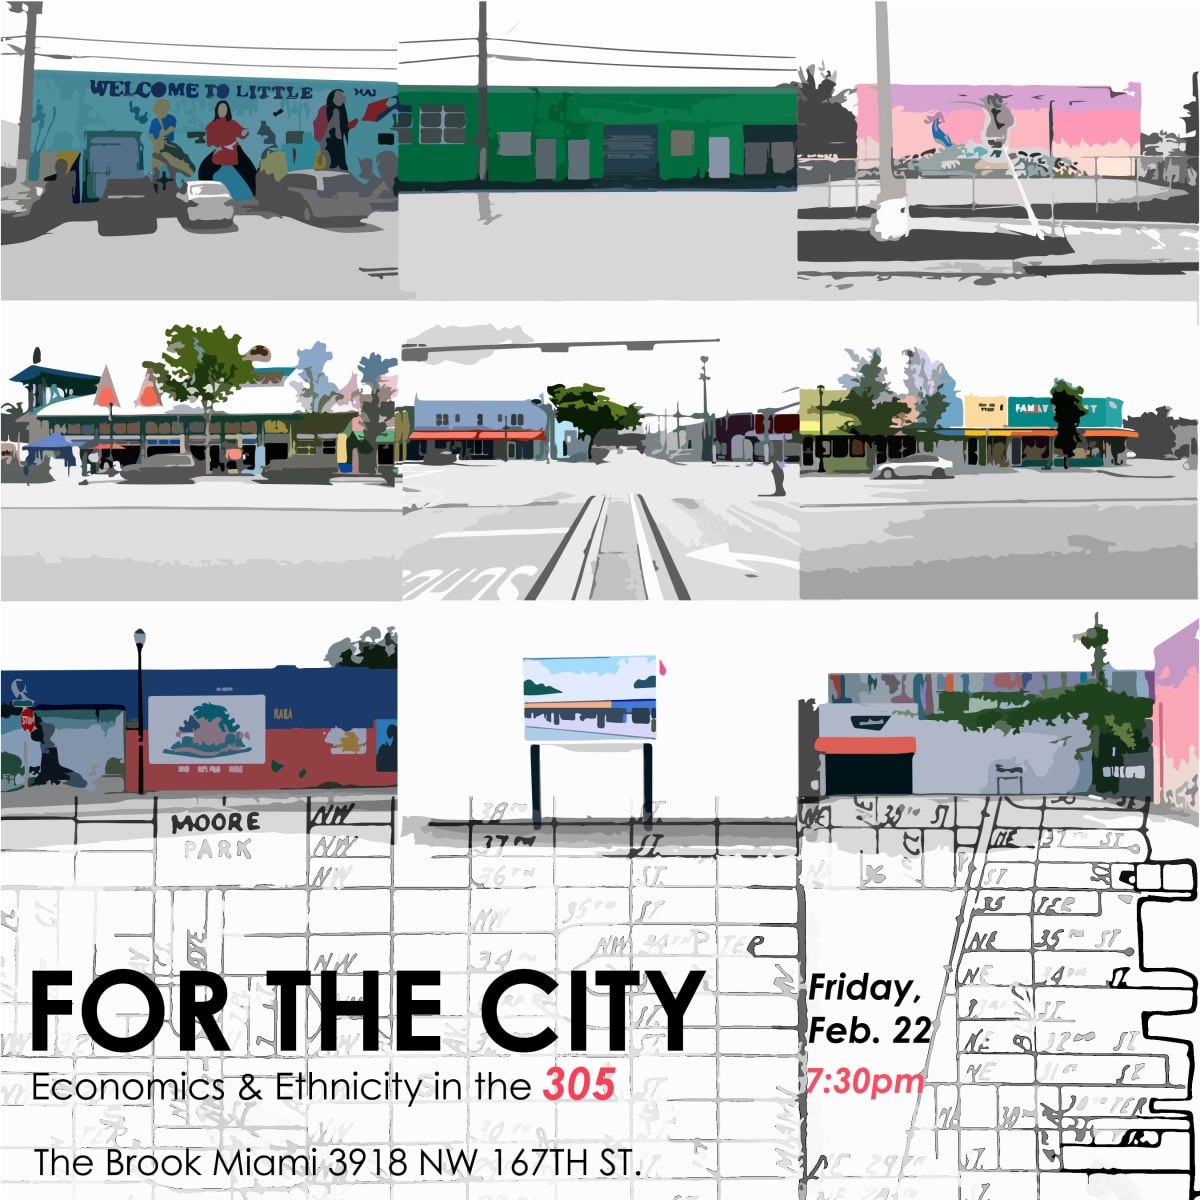 For The City by Danyealah Green-Lemons  Image: A digital artwork created for the promotion of a community panel event titled, "For The City: Economics & Ethnicity in the 305," produced by the artist in 2019.